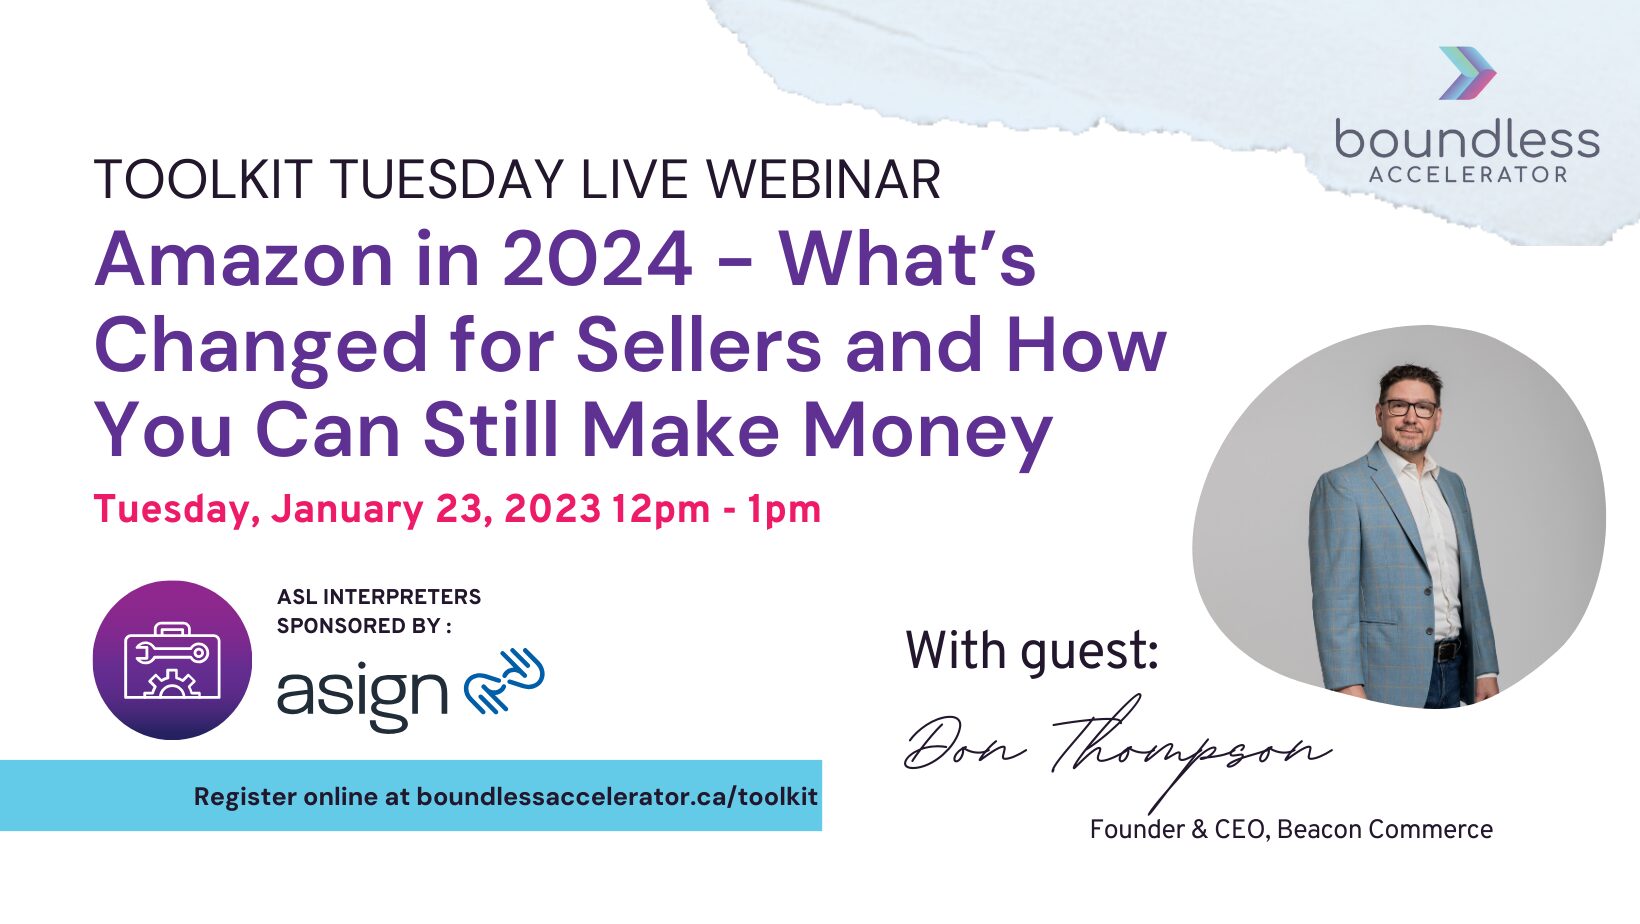 Toolkit Tuesday Live Webinar — Amazon in 2024: What's Changed for Sellers and How You Can Still Make Money!